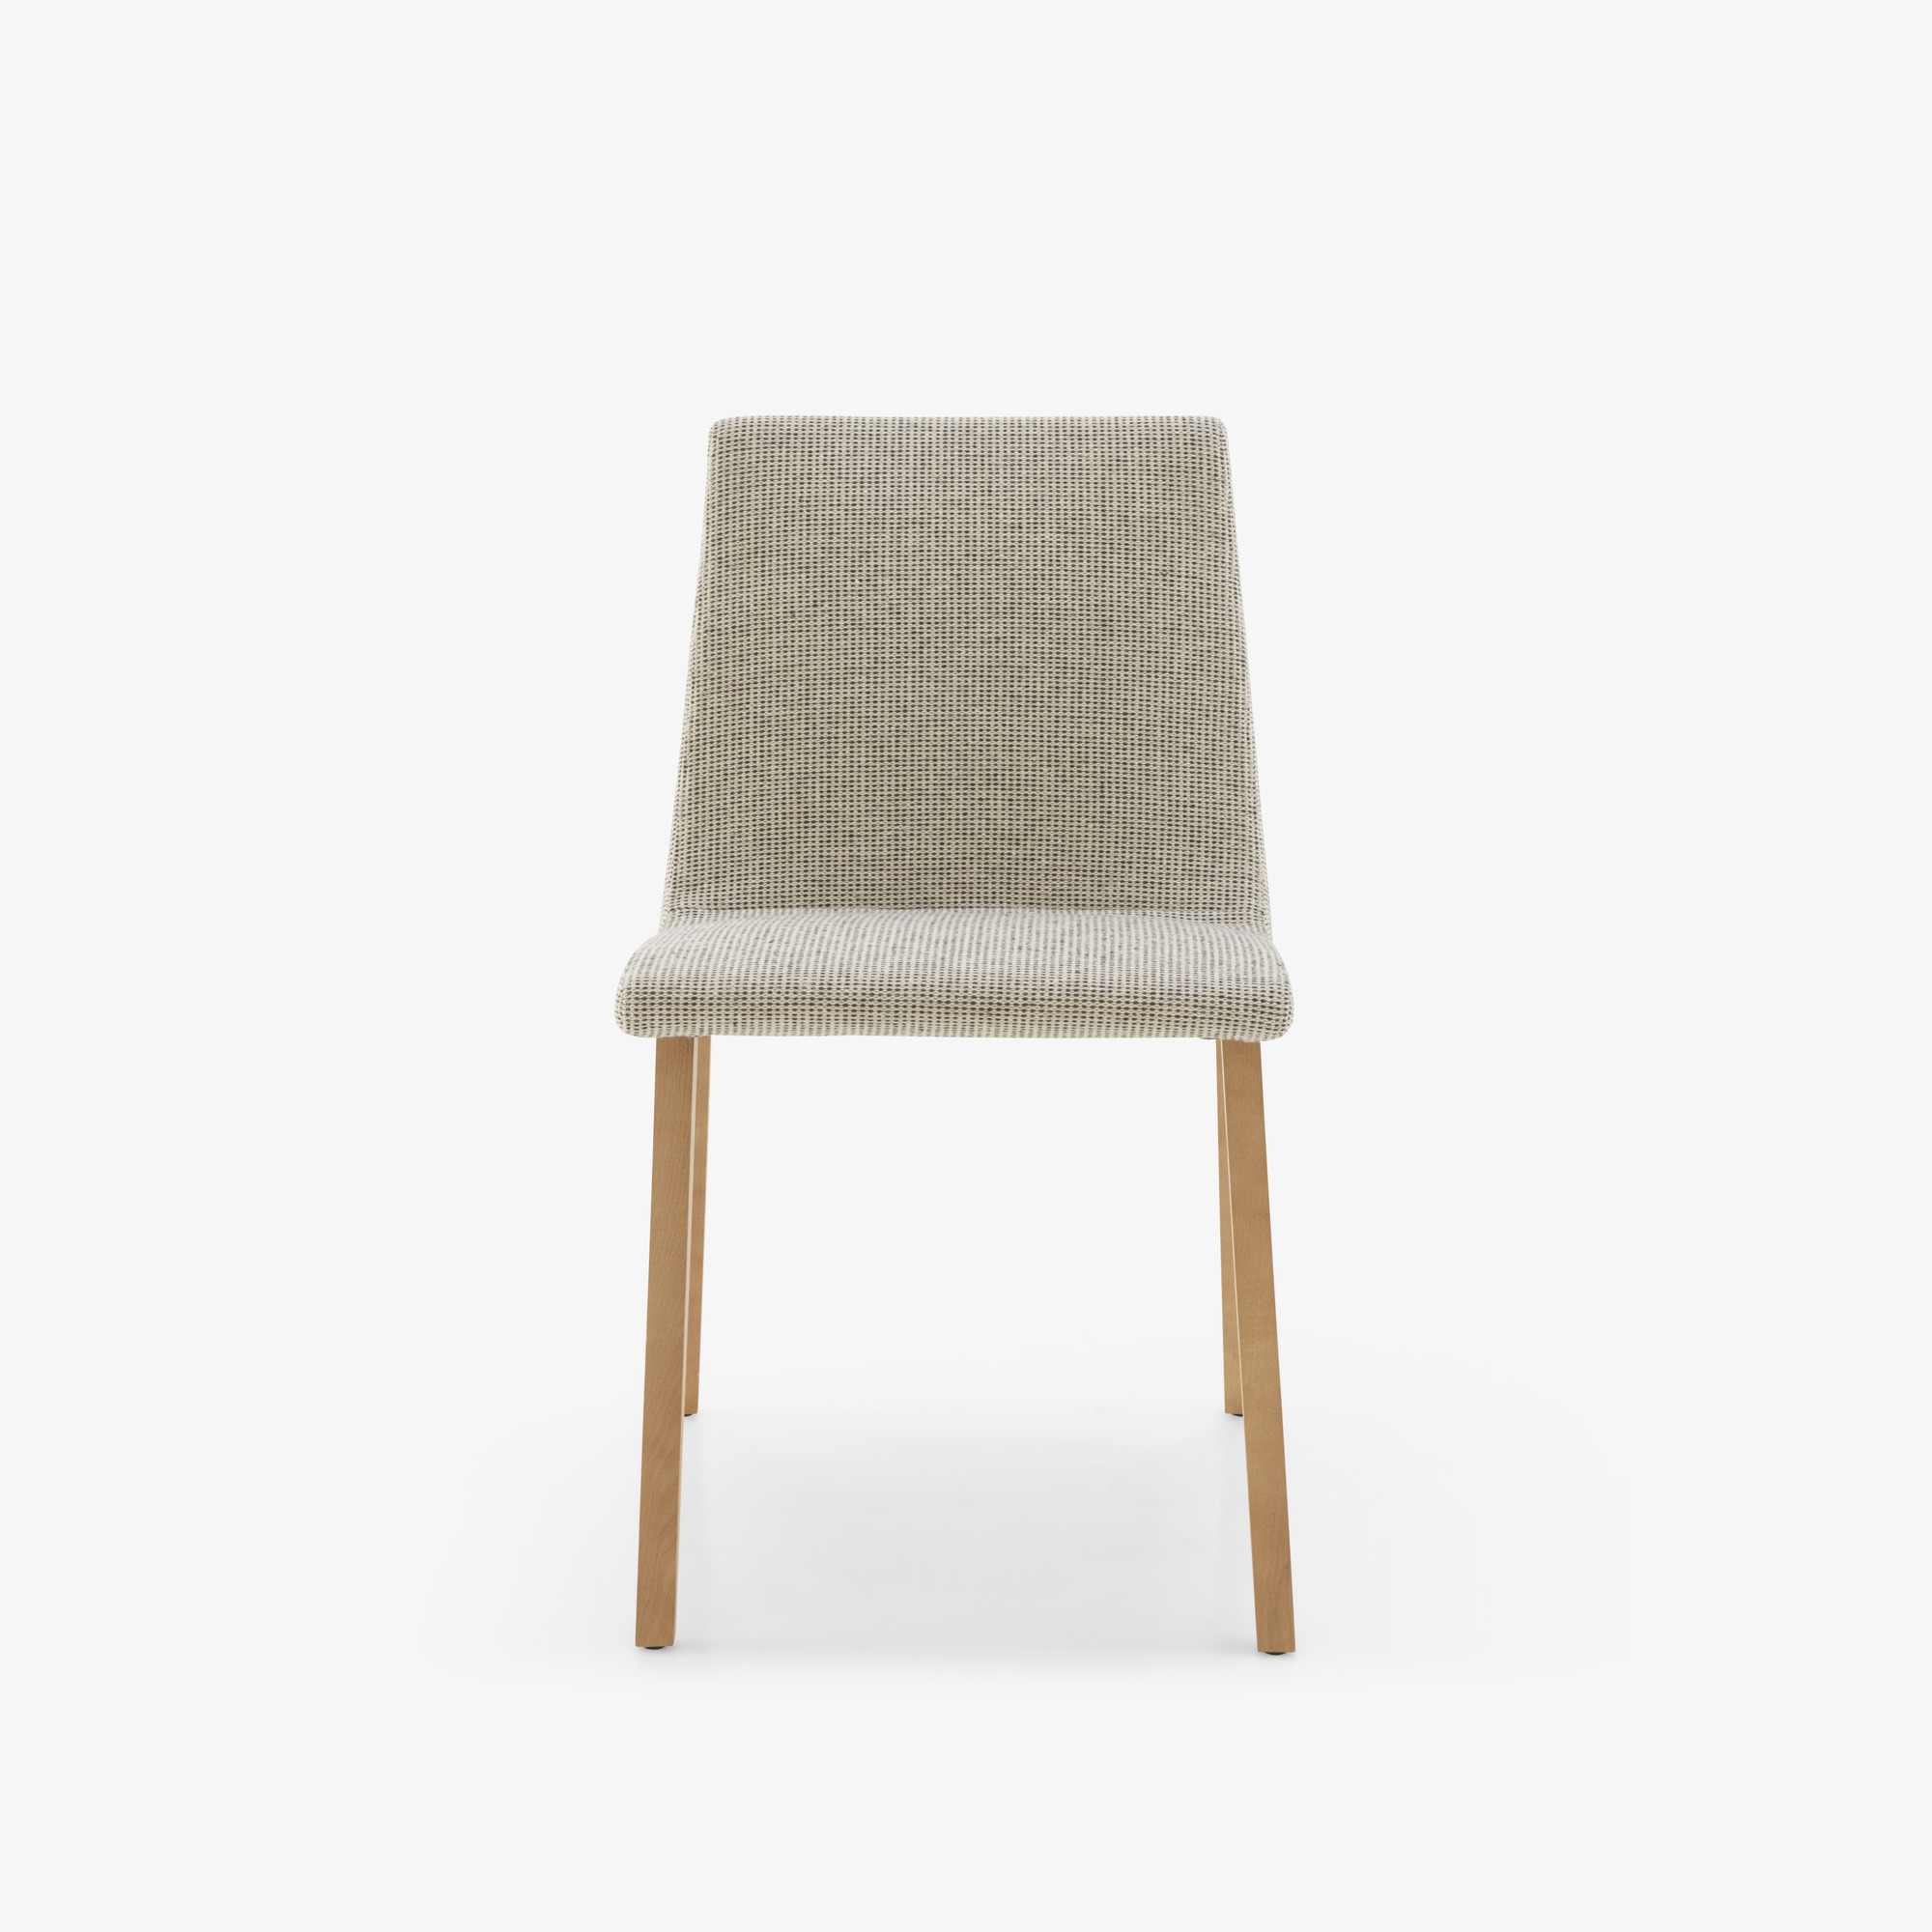 Image Chair wooden base 1